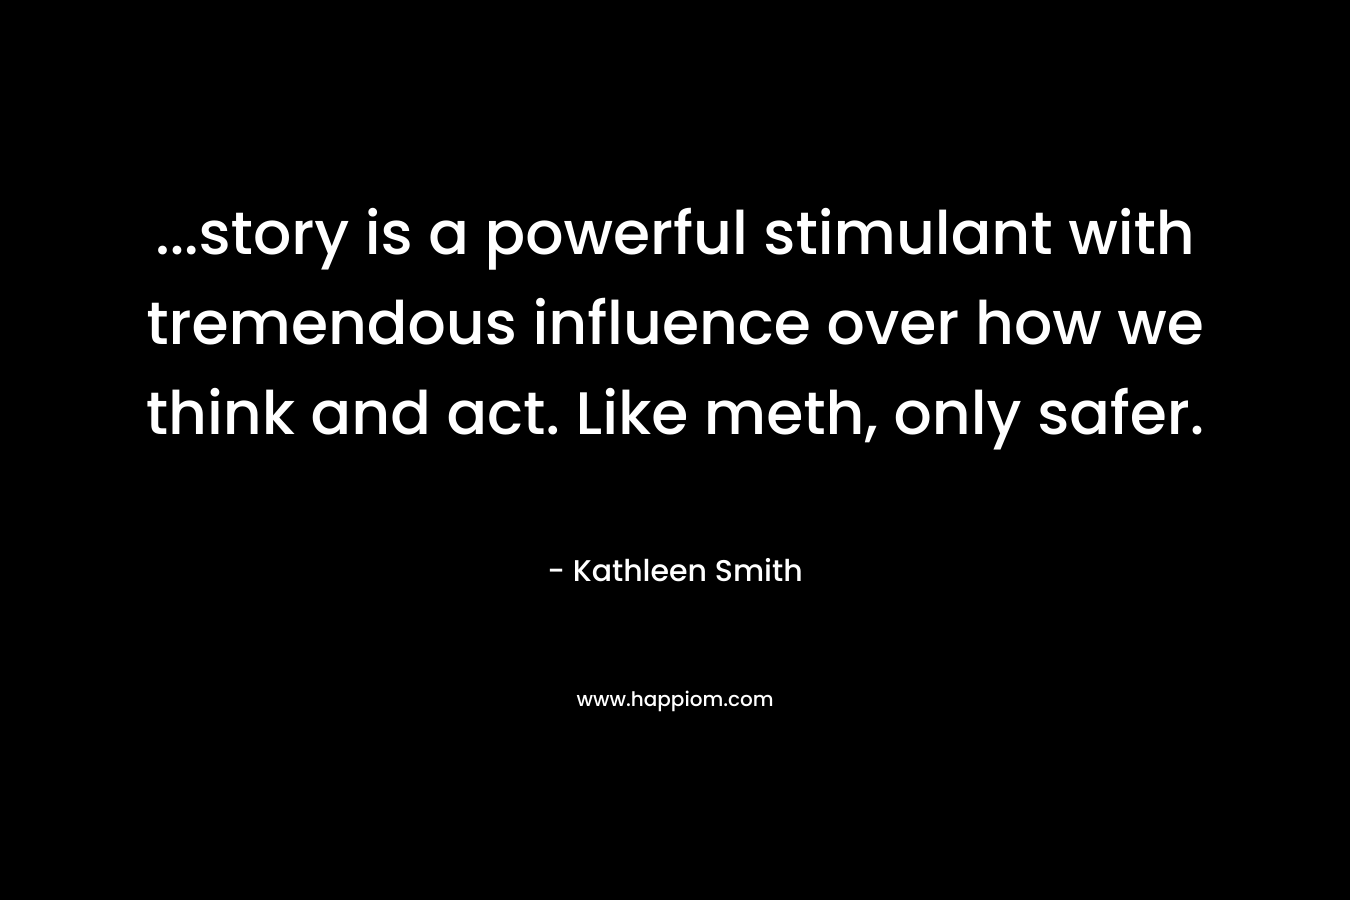 ...story is a powerful stimulant with tremendous influence over how we think and act. Like meth, only safer.